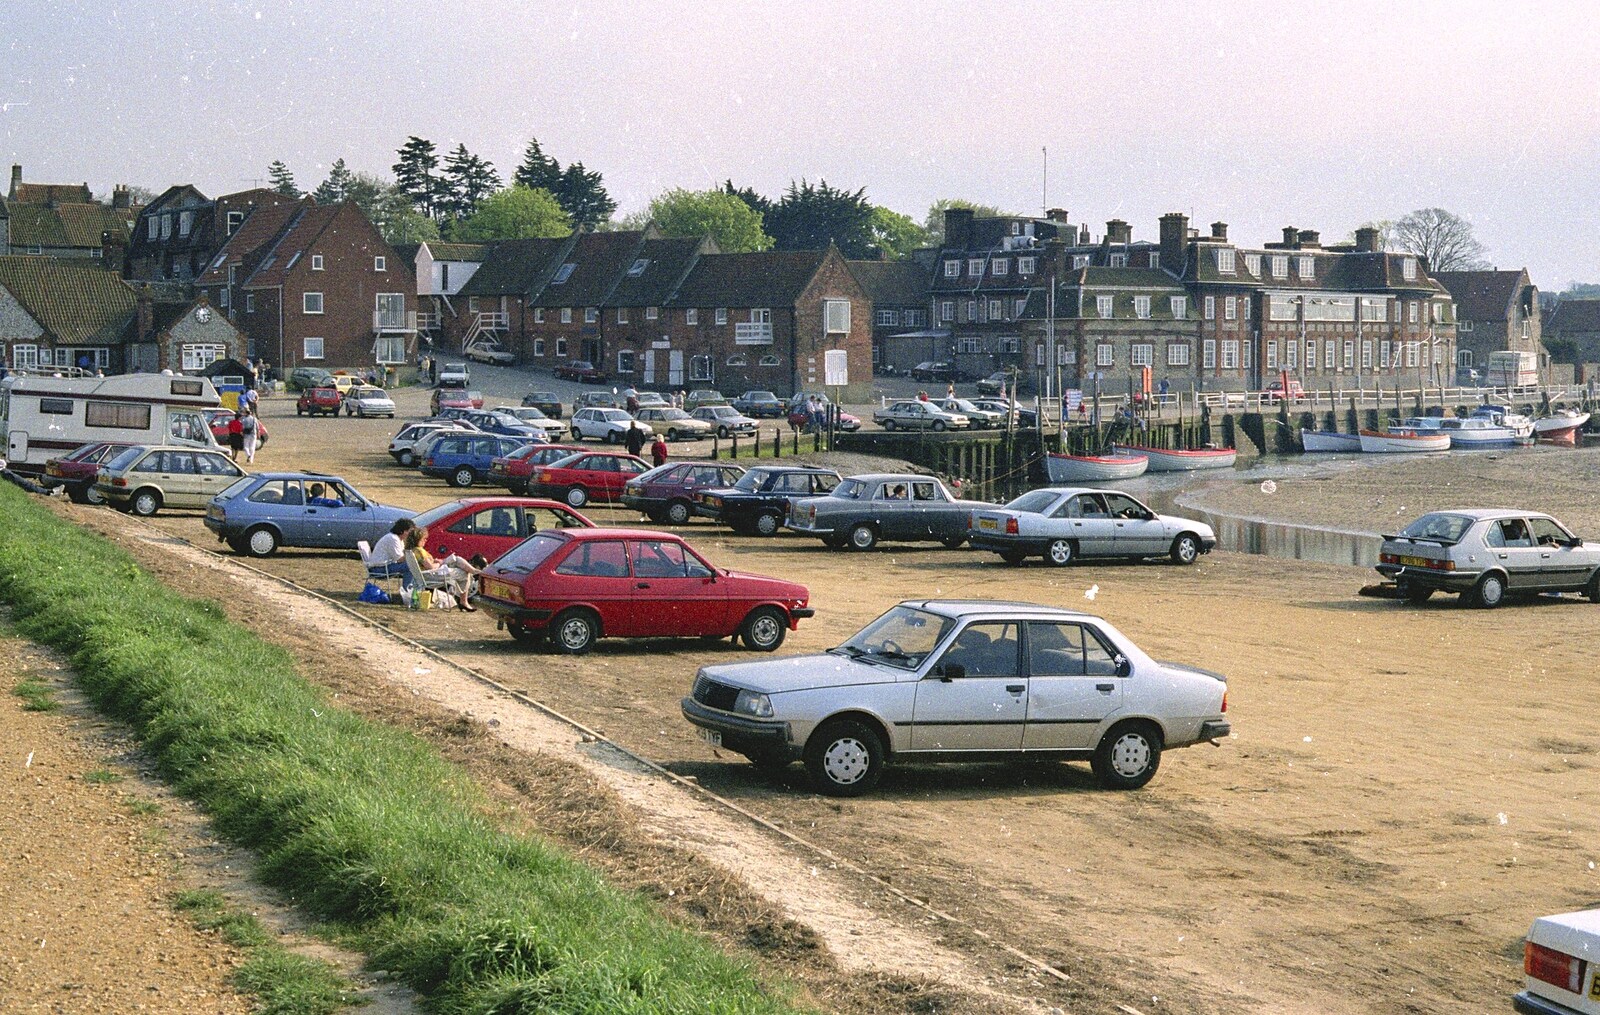 A Blakeney car park from Tapestry With Baz, and a Trip to Blakeney, Suffolk and Norfolk - 14th May 1990